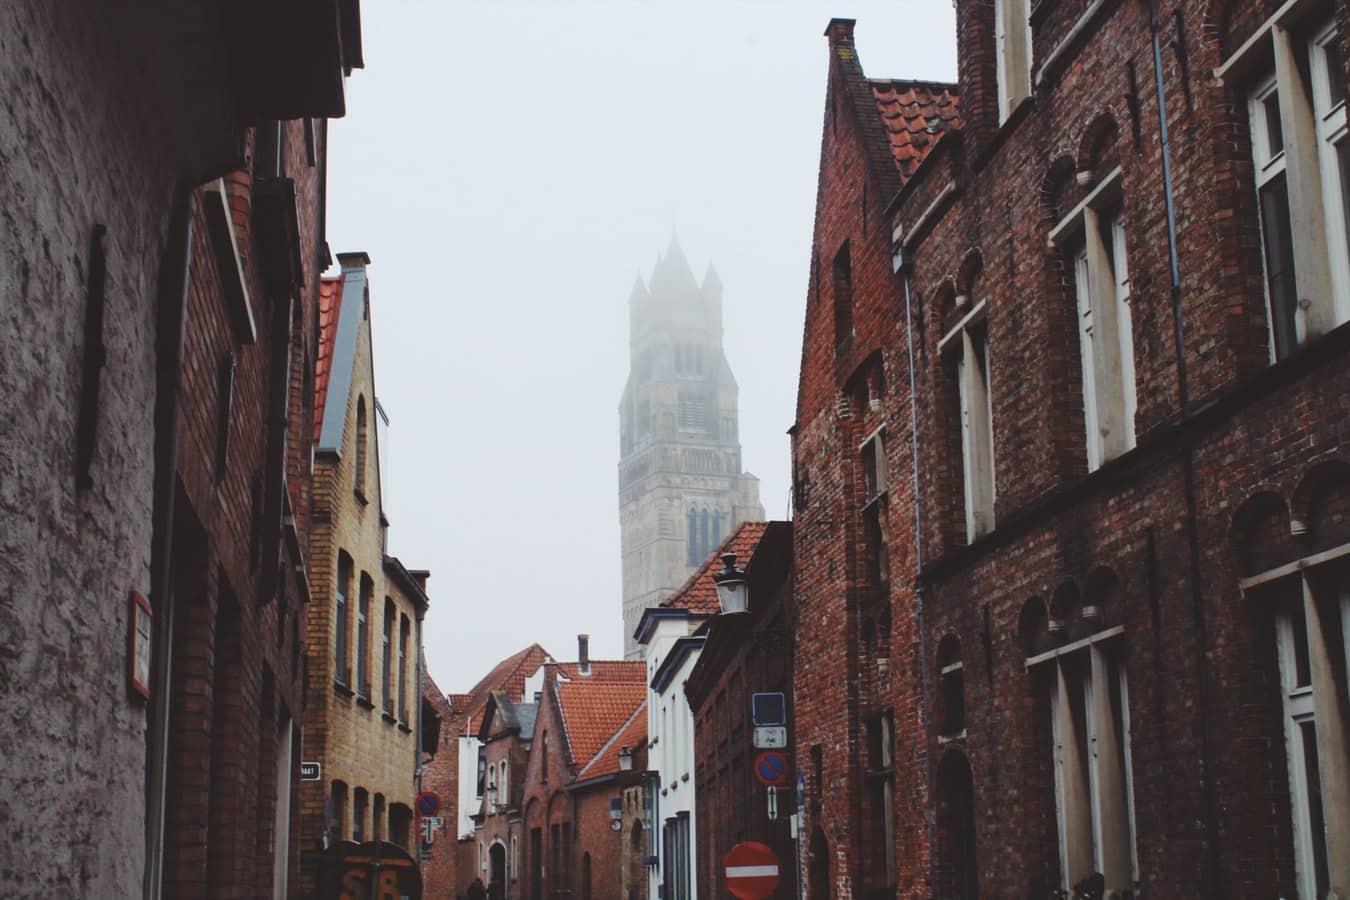 What To Do In One Day In Bruges | The Ultimate 24 Hour Guide!